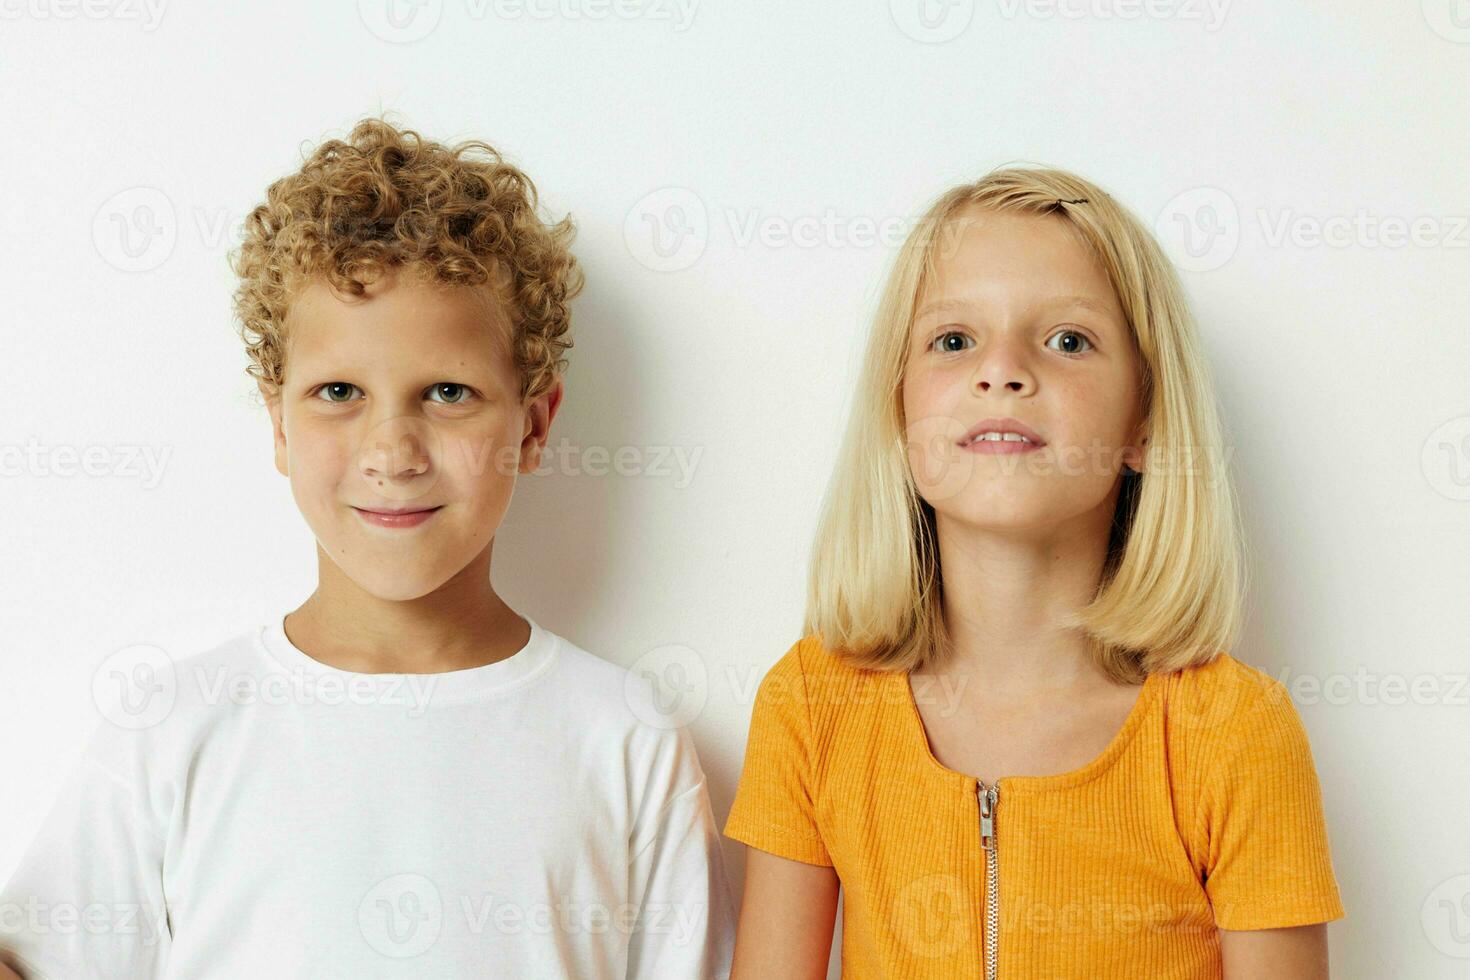 cheerful children casual clothes posing emotions studio isolated background unaltered photo